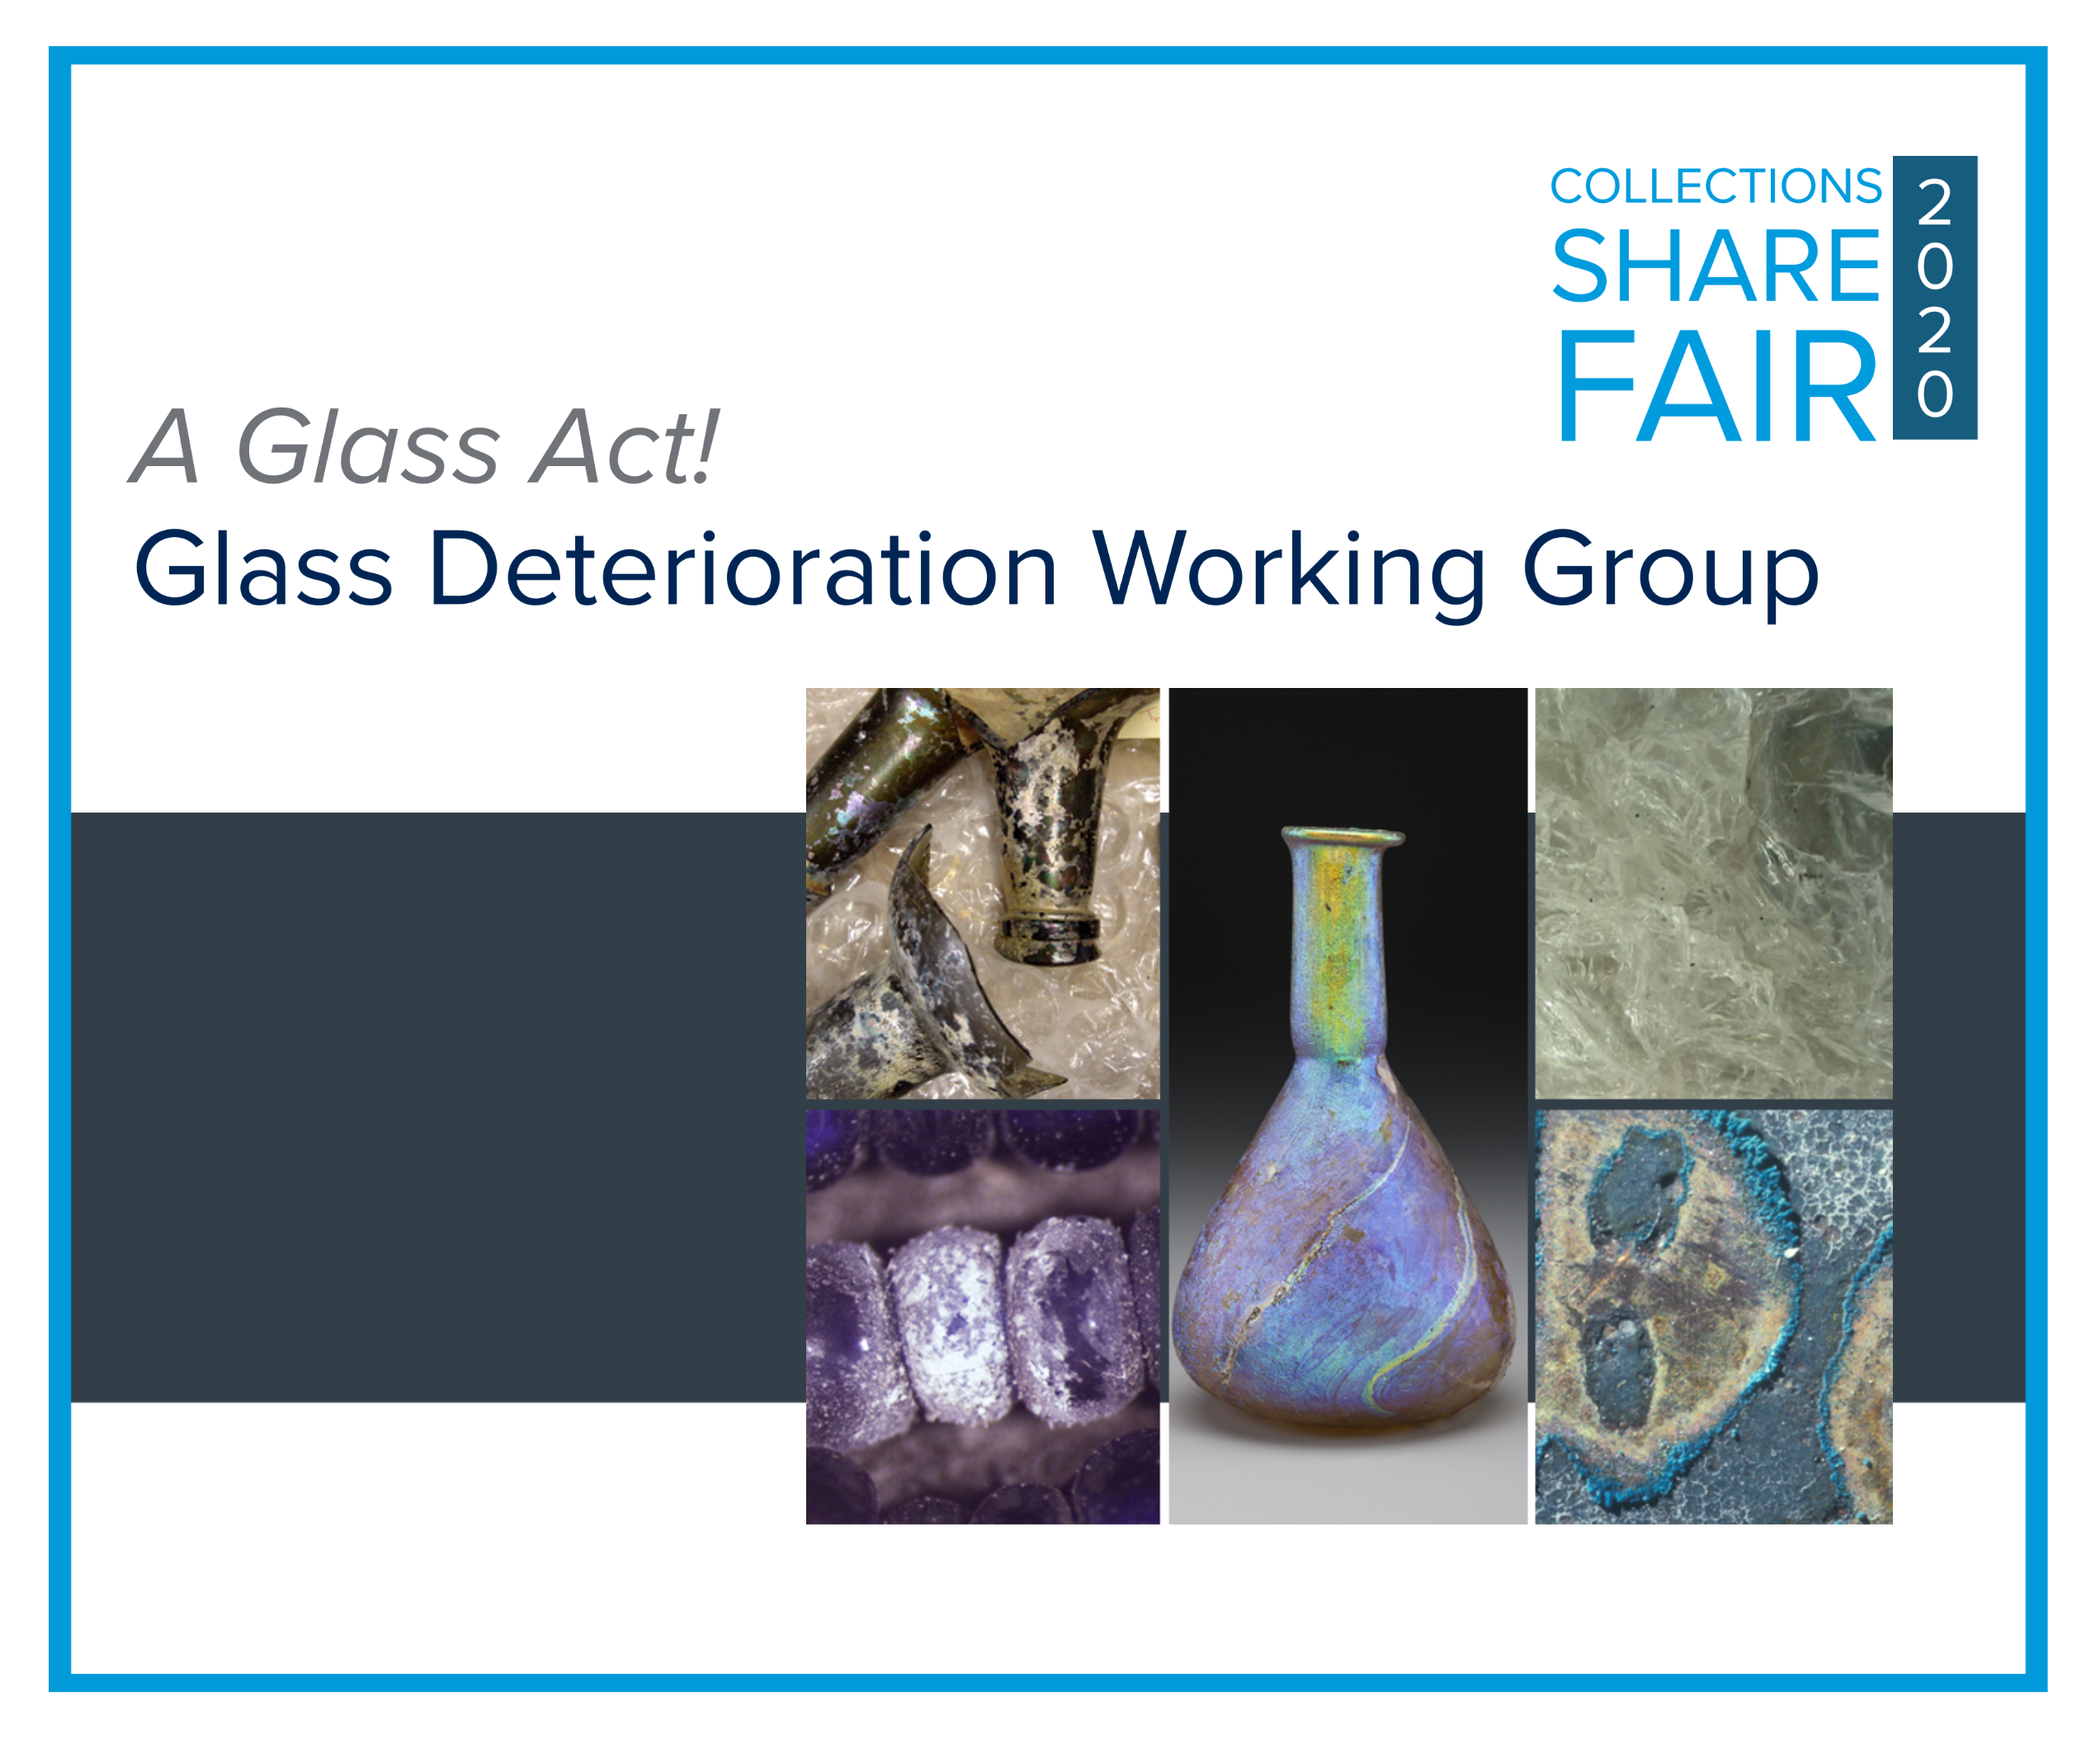 Glass Deterioration Working Group